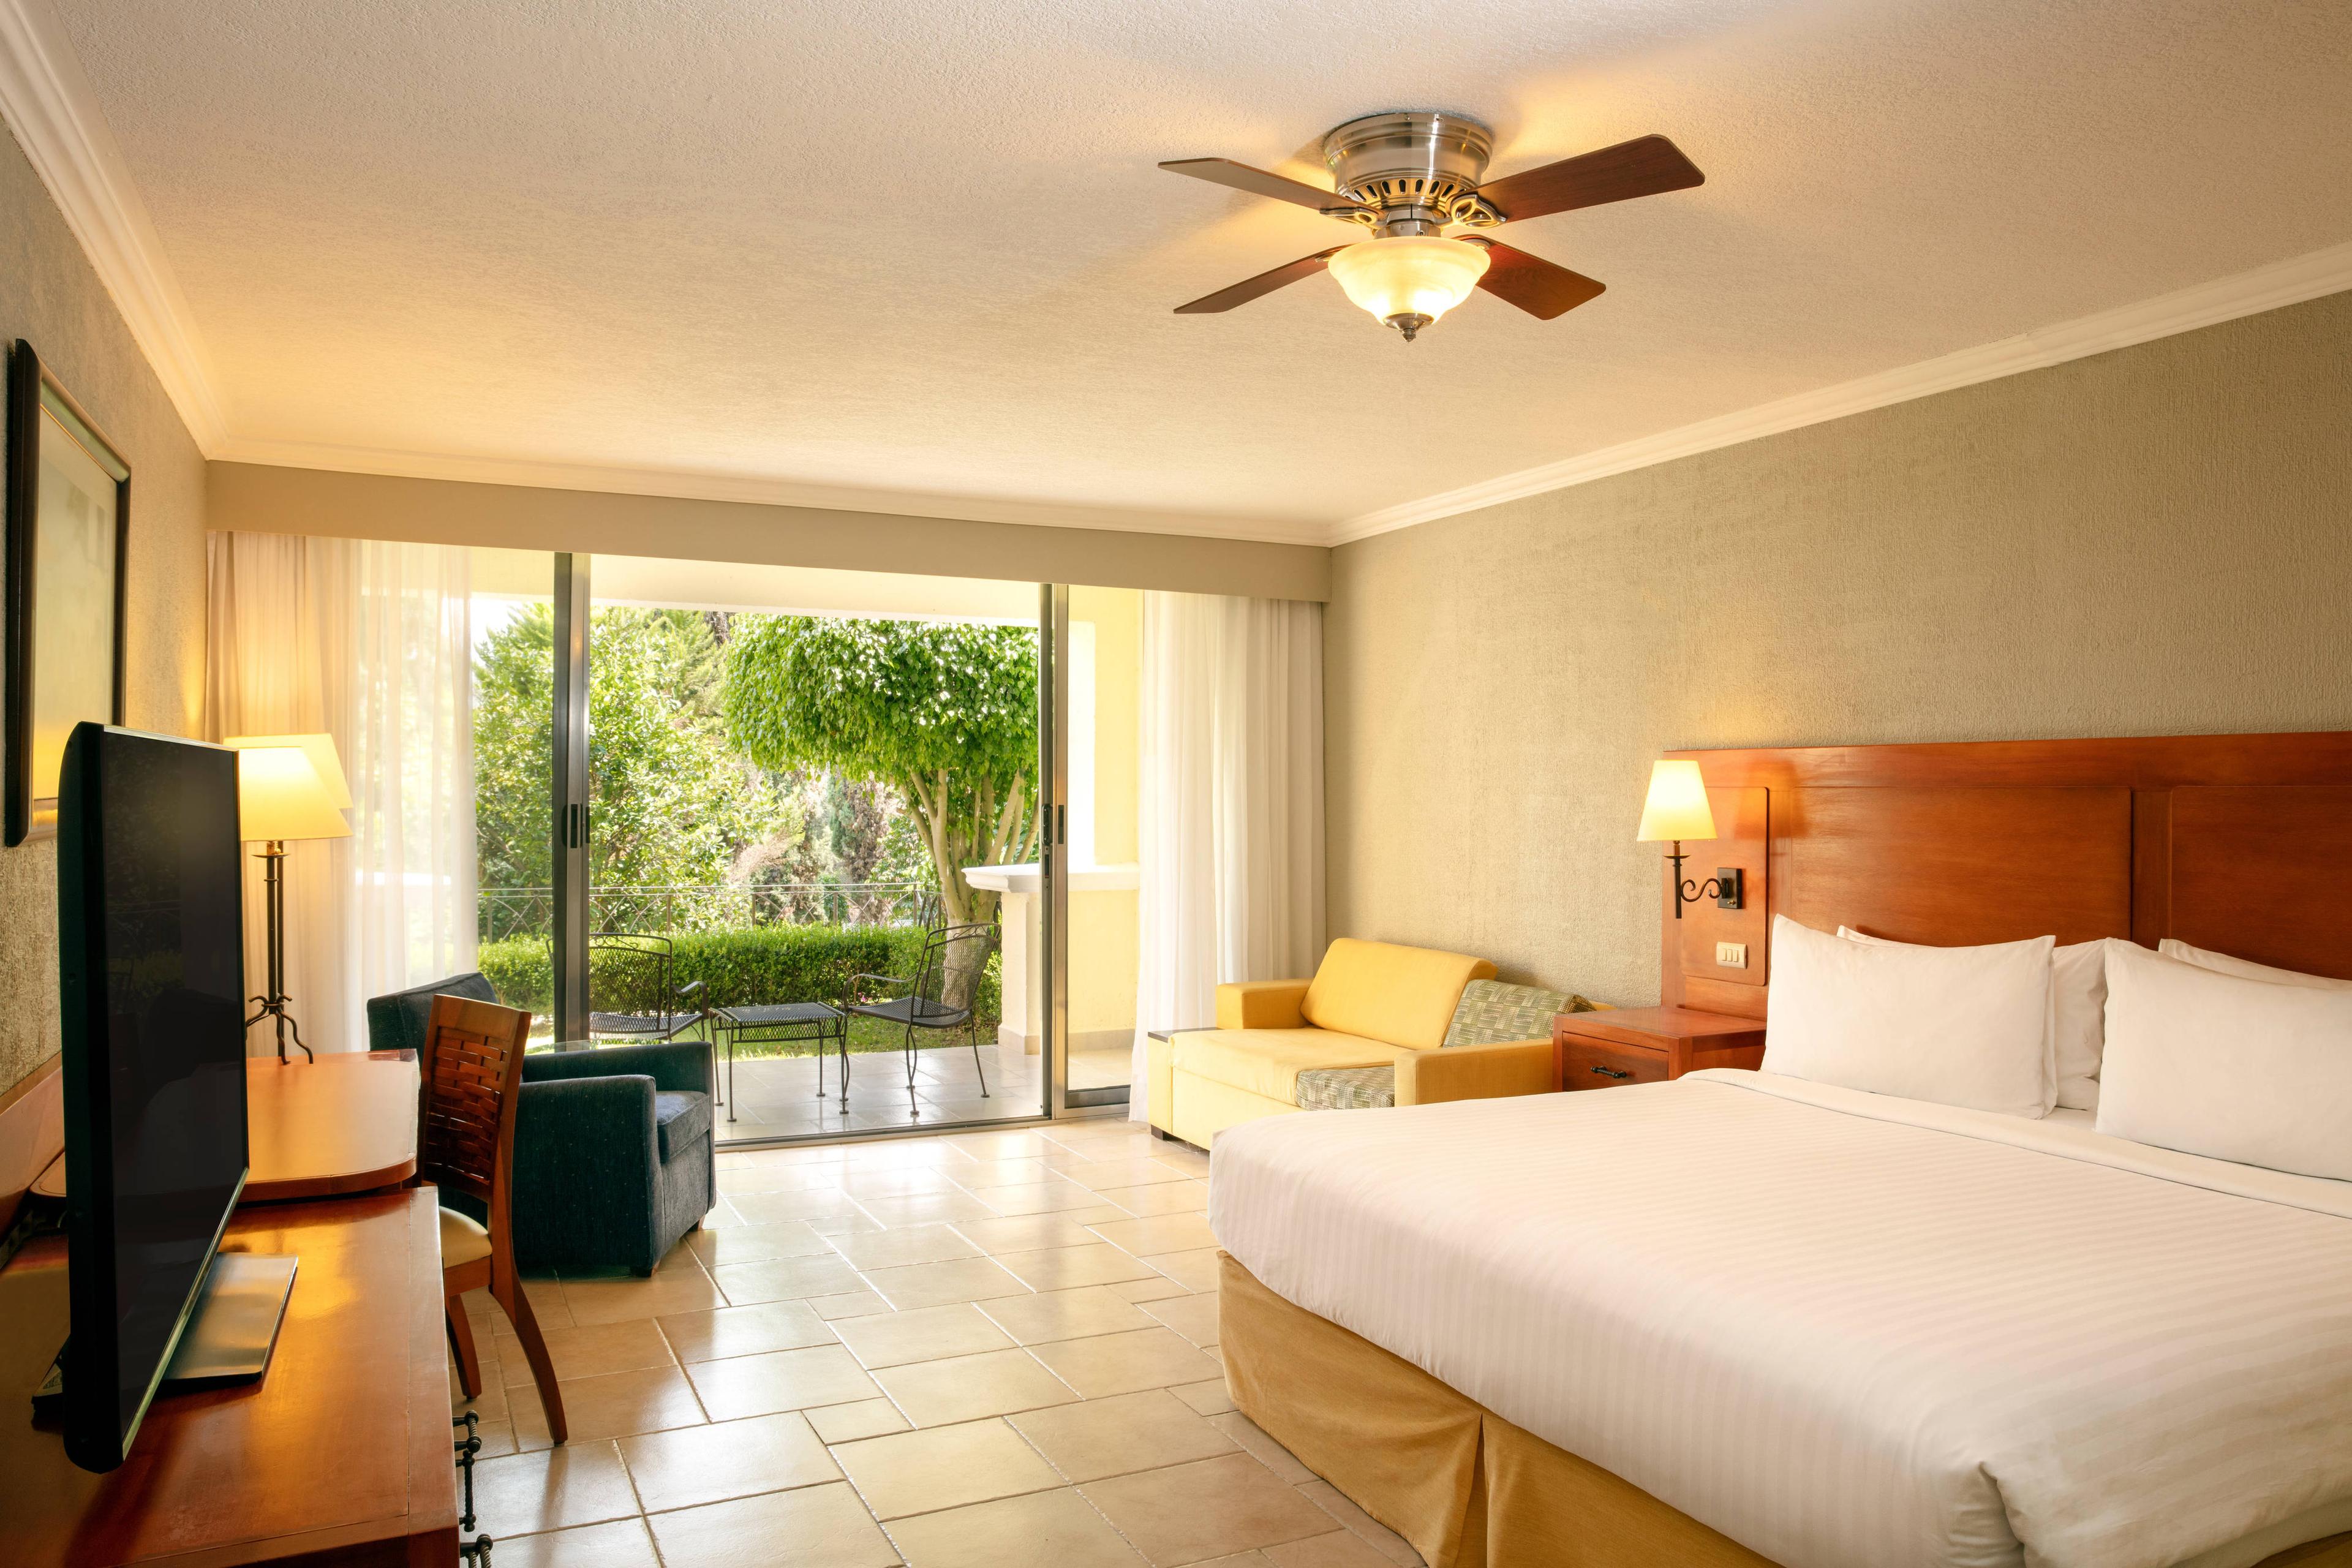 Our guest rooms with terrace views feature private patios to enjoy our hacienda-style resort's gardens.